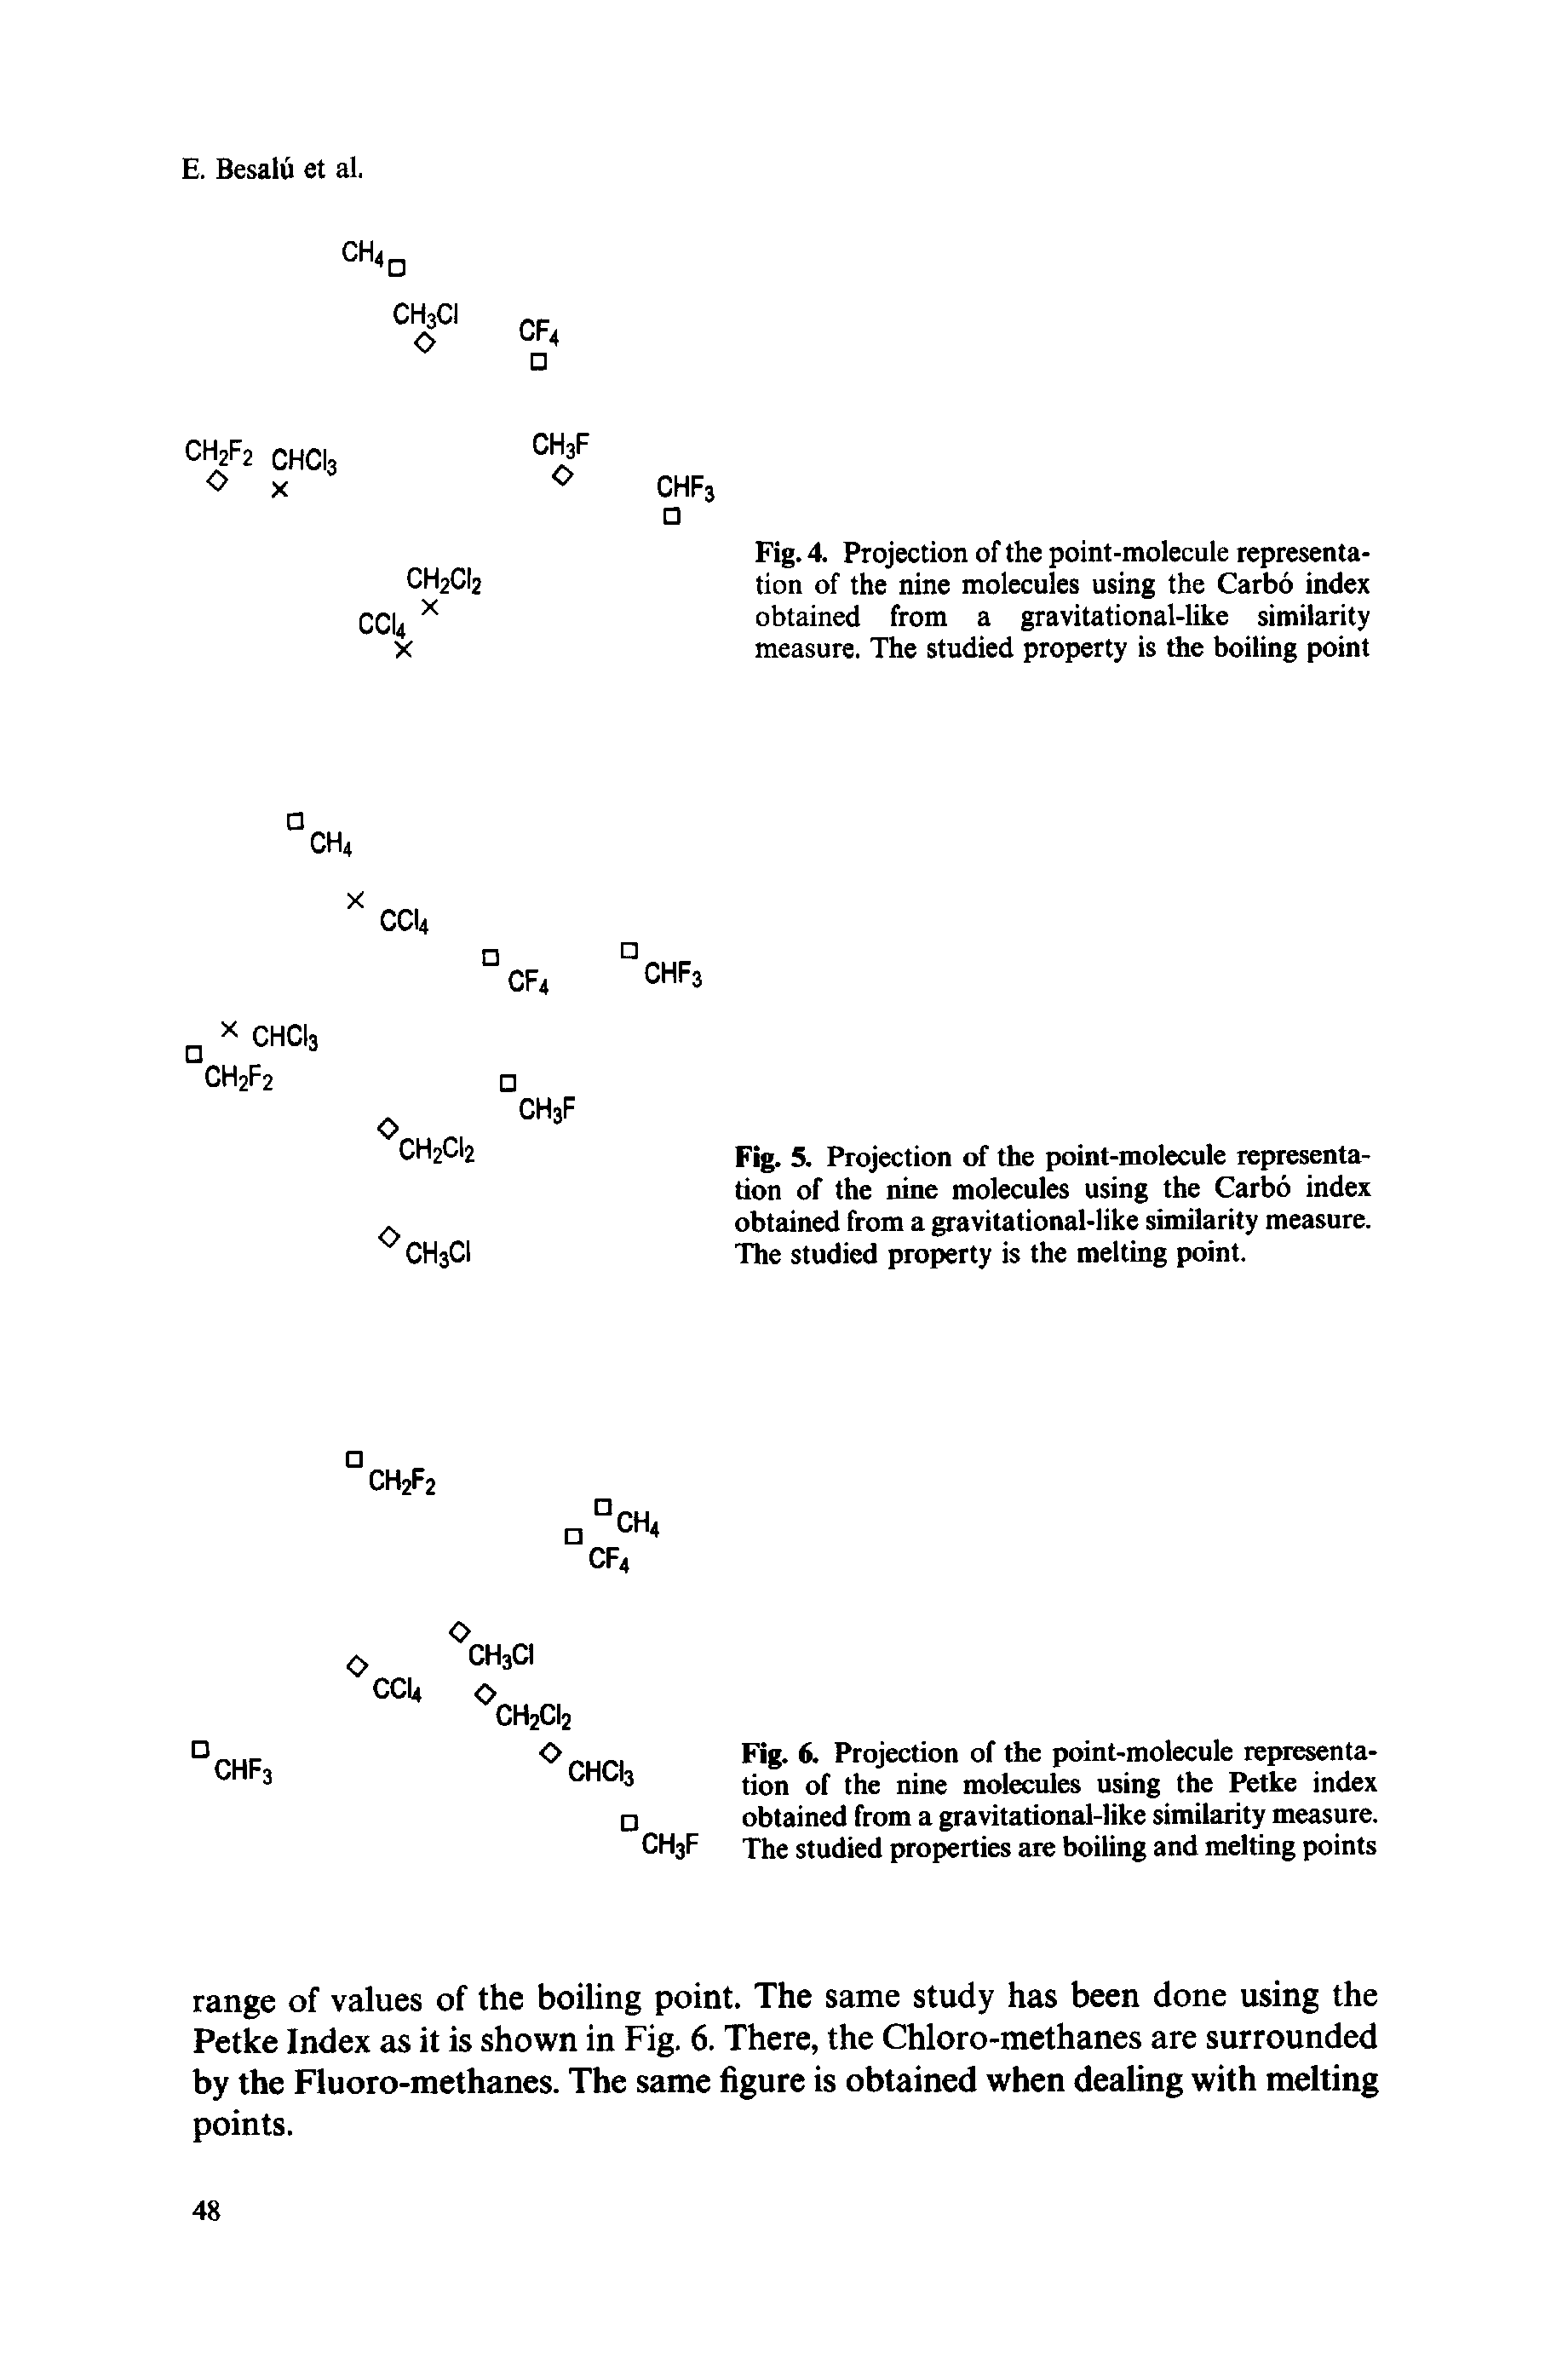 Fig. 4. Projection of the point-molecule representation of the nine molecules using the Carbo index obtained from a gravitational-like similarity measure. The studied property is the boiling point...